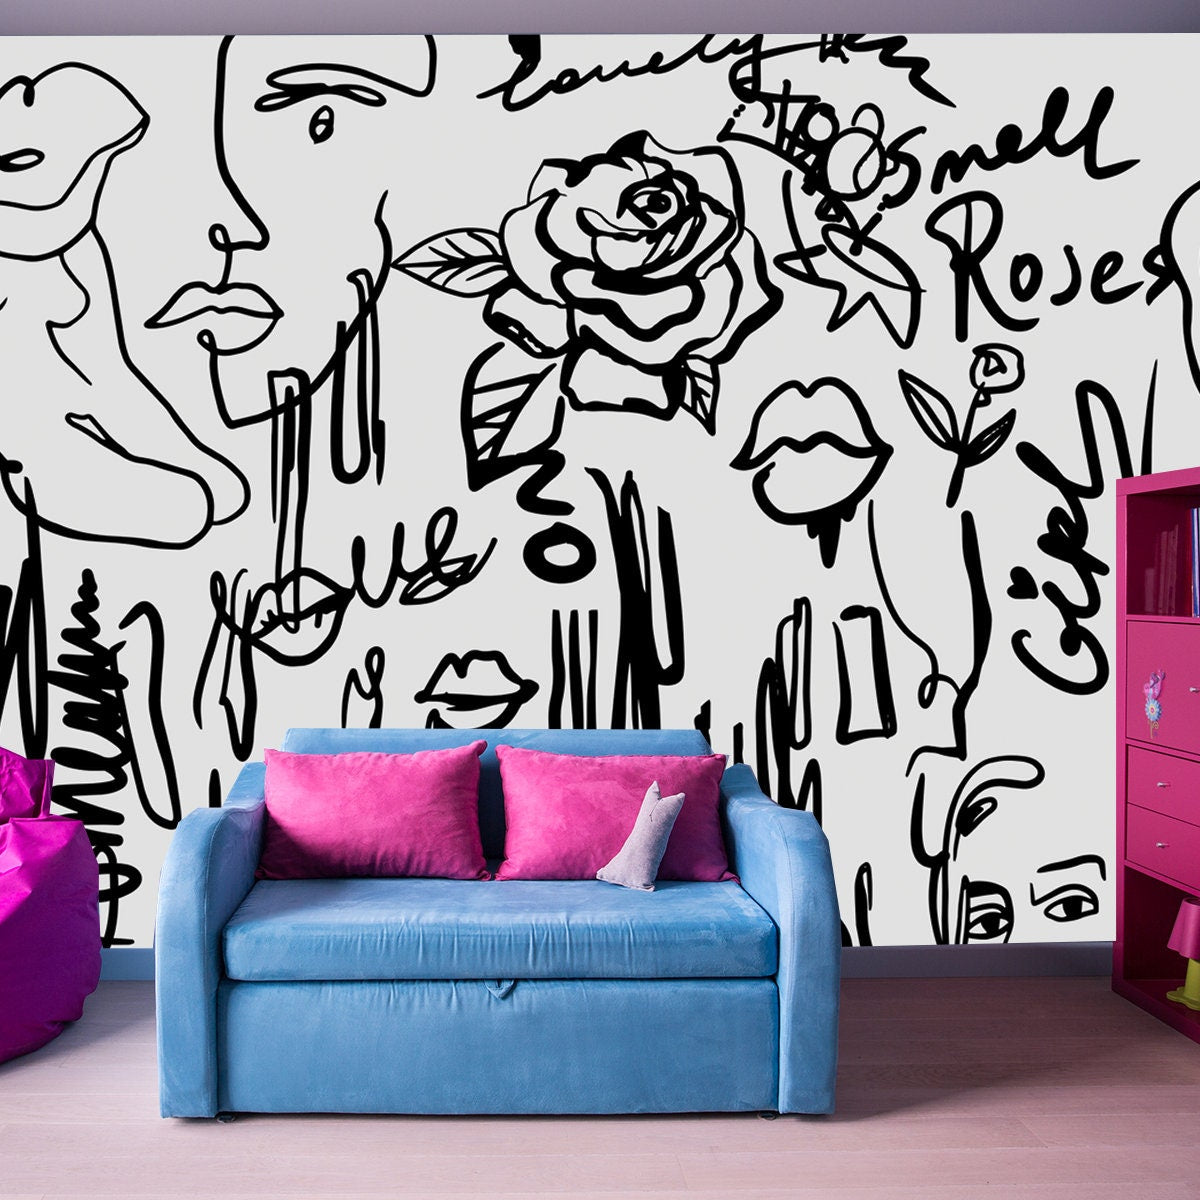 Grunge Wallpaper with Black Graffiti on White Background. Abstract Wallpaper with Female Faces, Lips, Text, Graffiti Teen Bedroom Mural